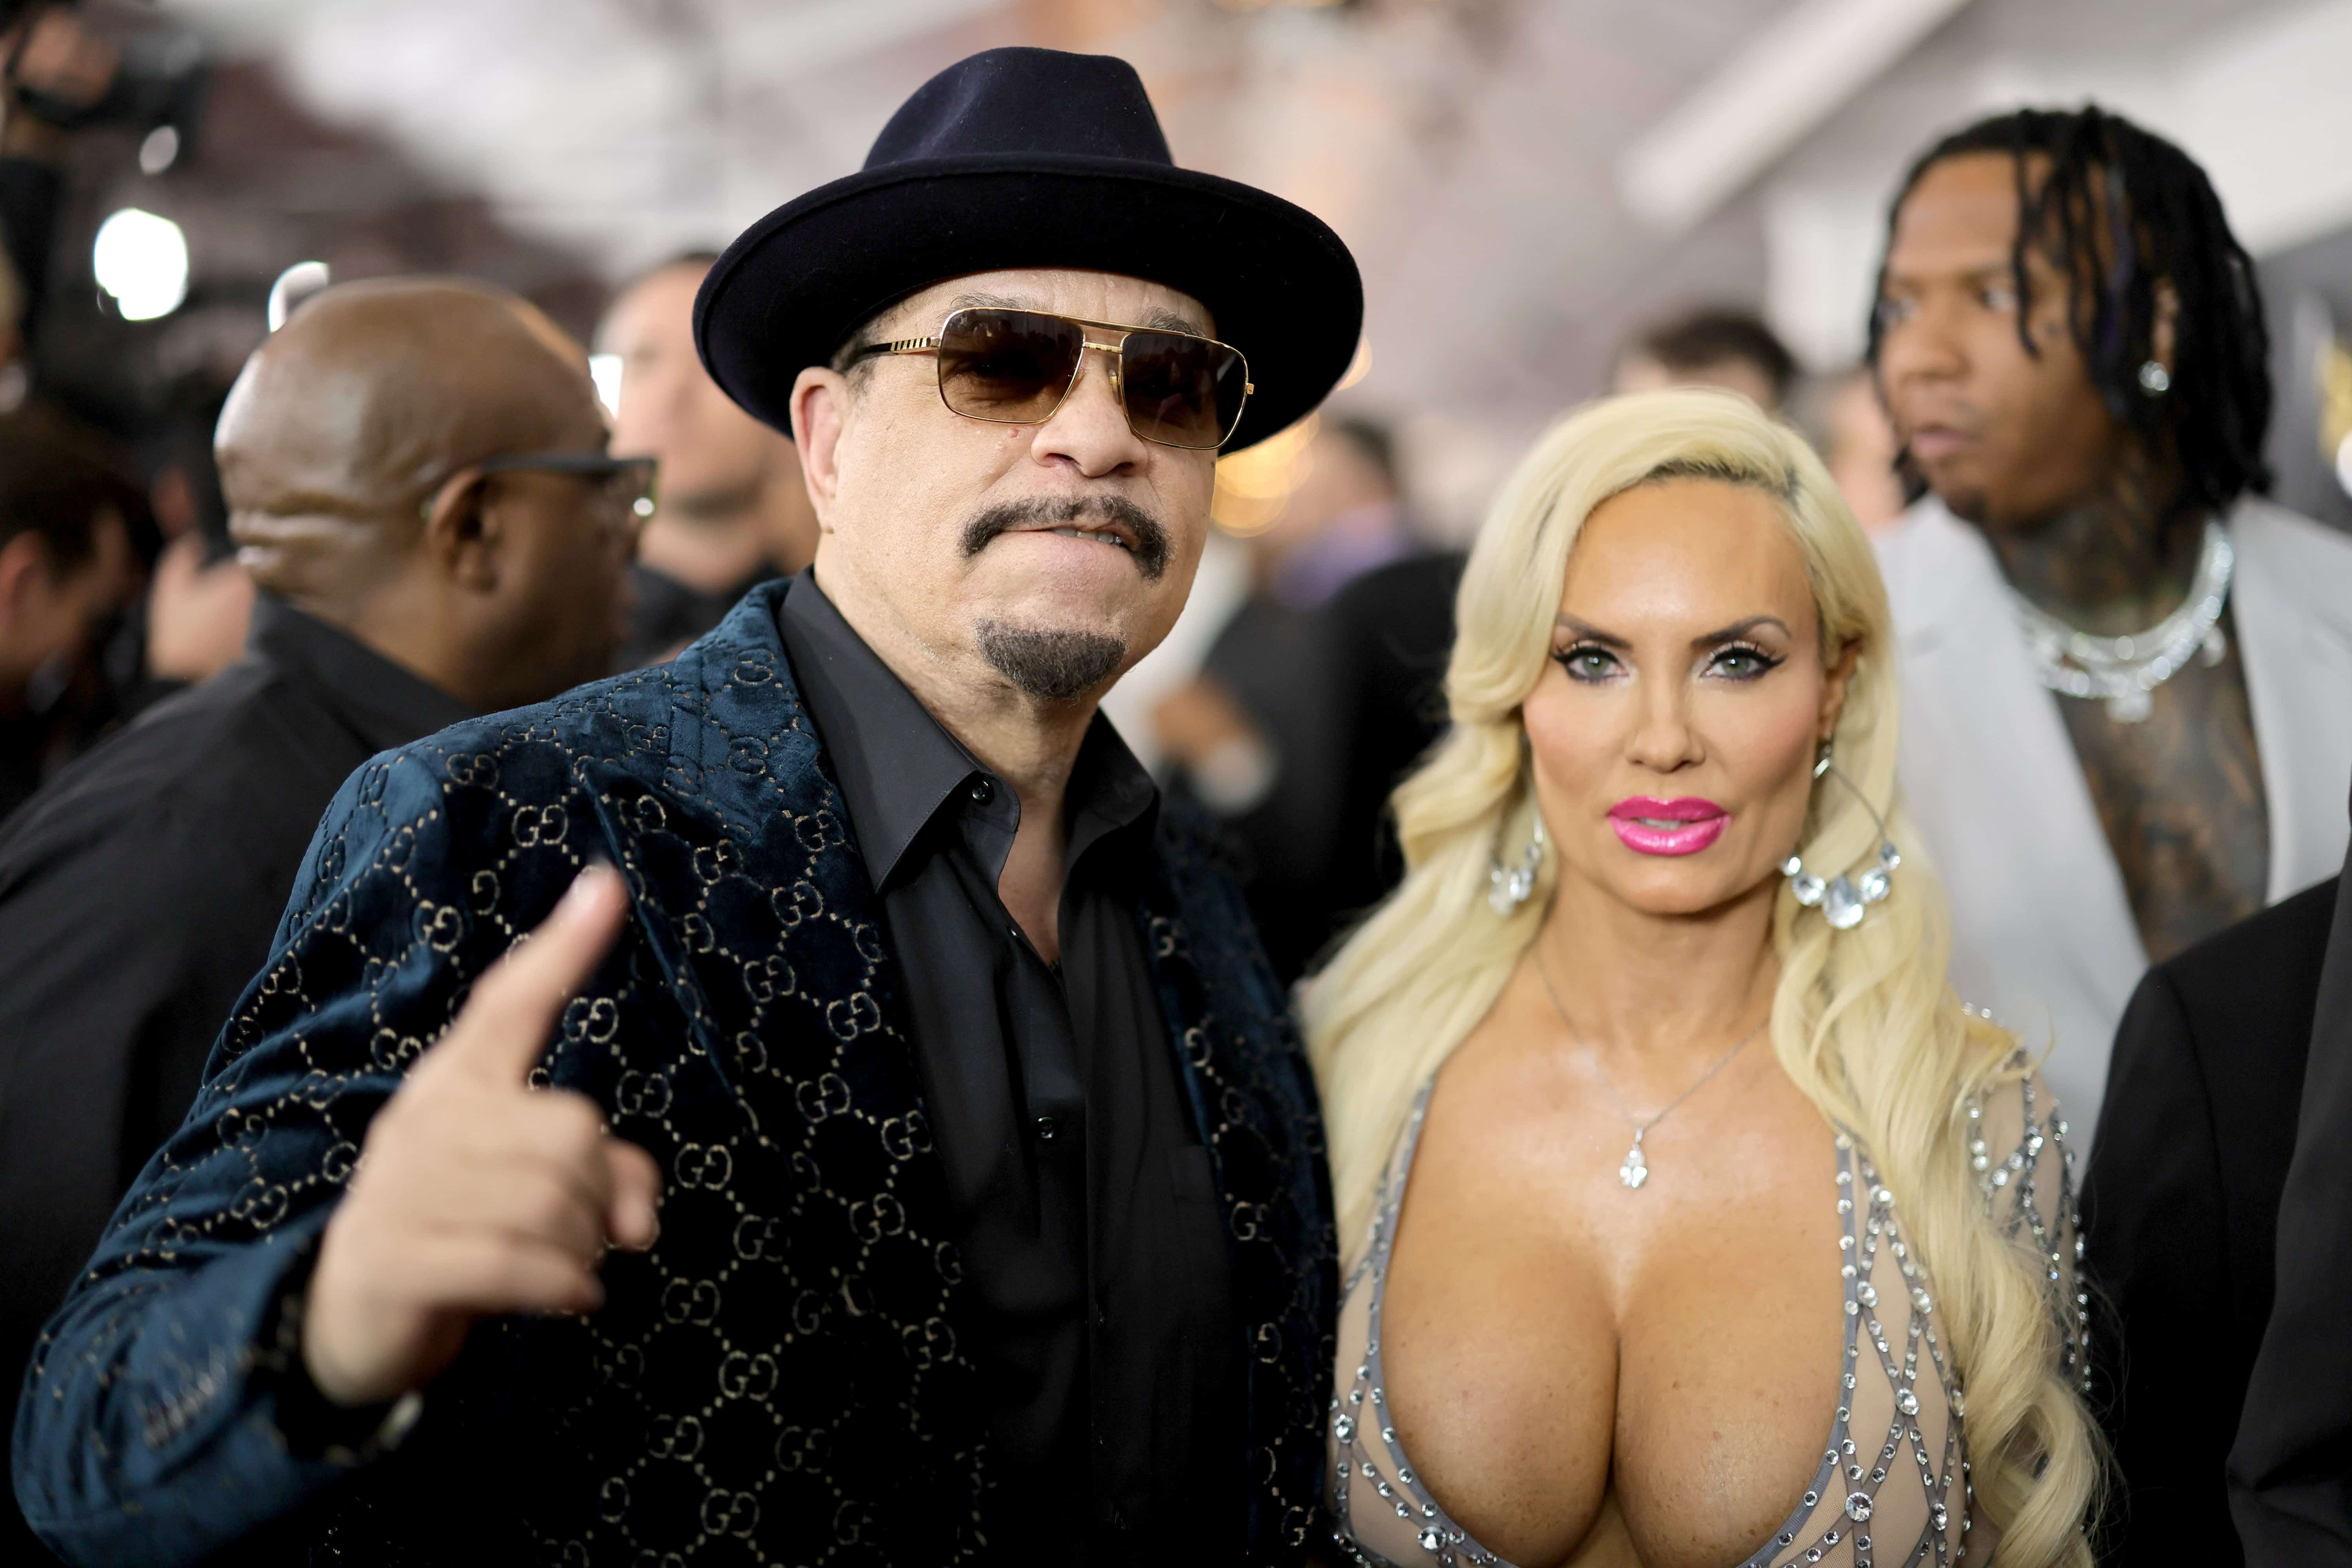 Ice-T And His Wife Coco Says Their 7 Y/O Daughter Still Sleeps In The Bed With Them image